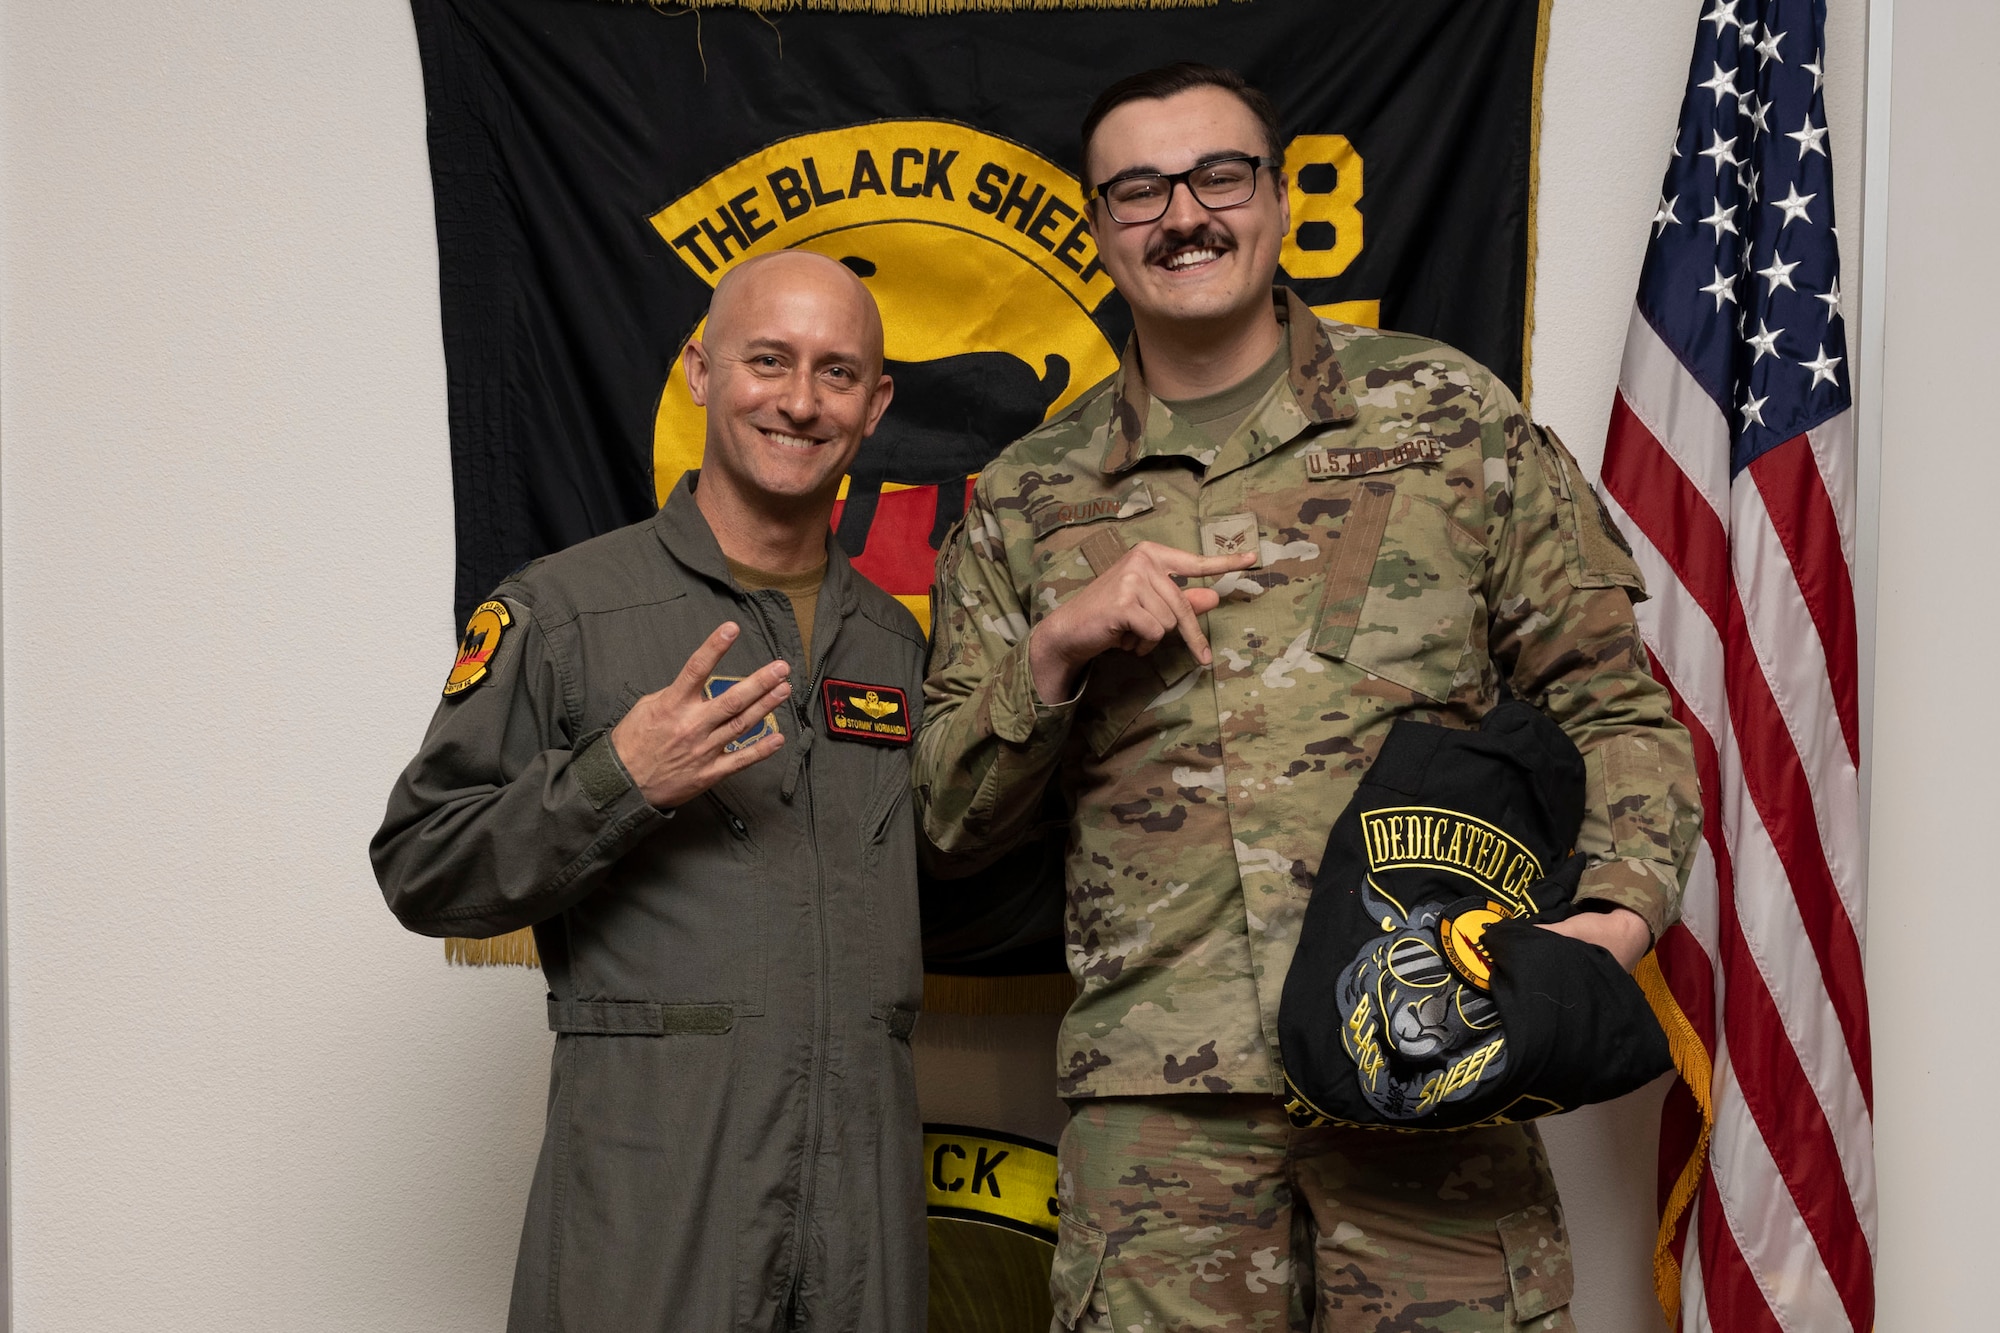 U.S. Air Force Senior Airman Thomas Quinn, 8th Aircraft Maintenance Unit crew chief, right, poses for a photo with U.S. Air Force Lt. Col. George Normandin, 8th Fighter Squadron commander, during a Dedicated Crew Chief Appointment ceremony at Holloman Air Force Base, New Mexico, Jan. 3, 2022. To receive the title of DCC, a crew chief must demonstrate a history of superior performance in their career, comply with all safety practices and complete all required training. (U.S. Air Force photo by Senior Airman Antonio Salfran)